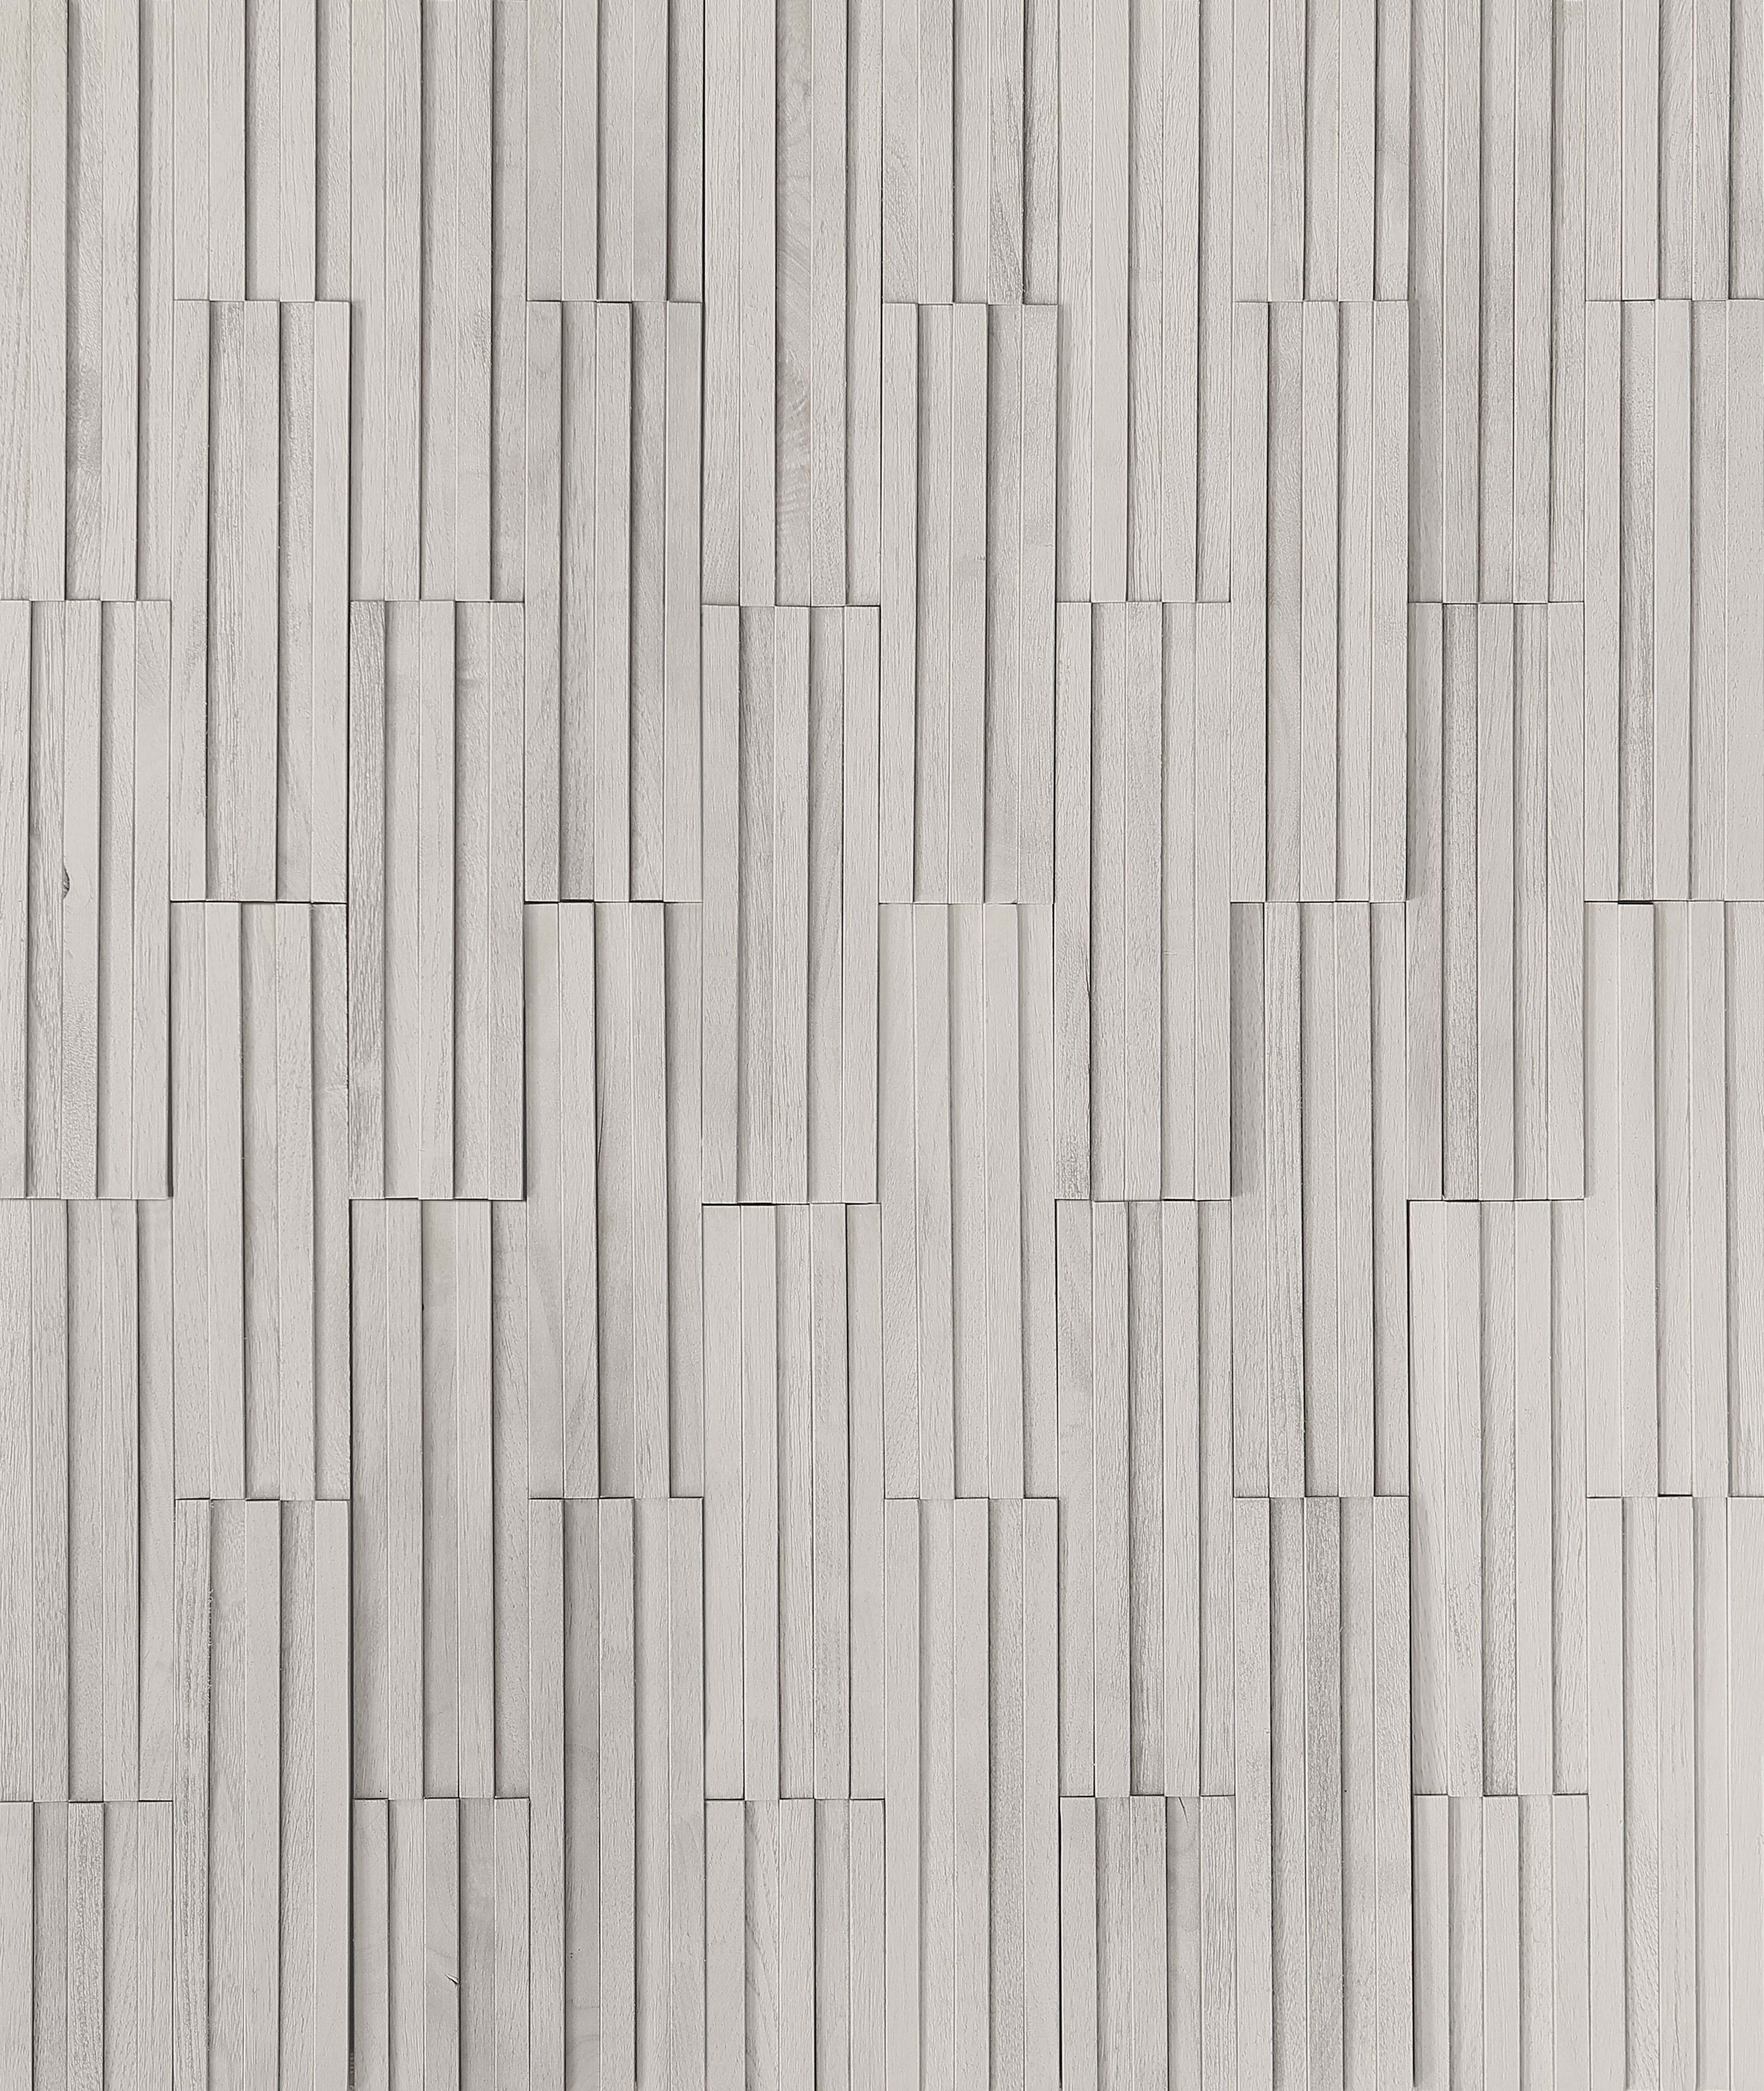 duchateau inceptiv parallels iceberg oak three dimensional wall natural wood panel lacquer for interior use distributed by surface group international